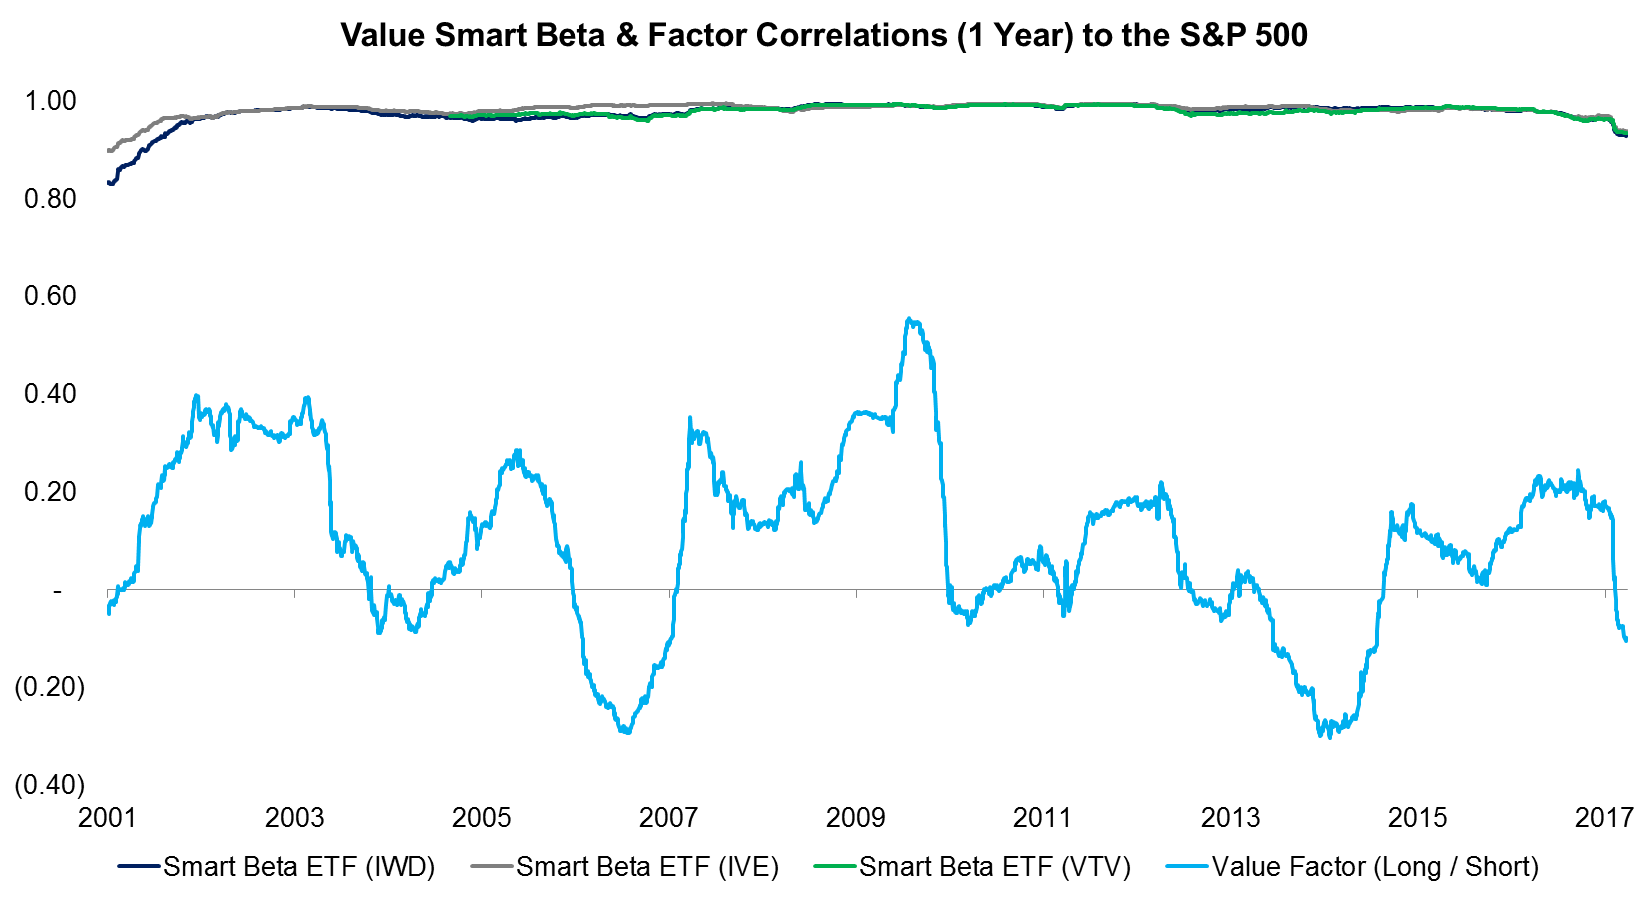 Value Smart Beta & Factor Correlations (1 Year) to the S&P 500